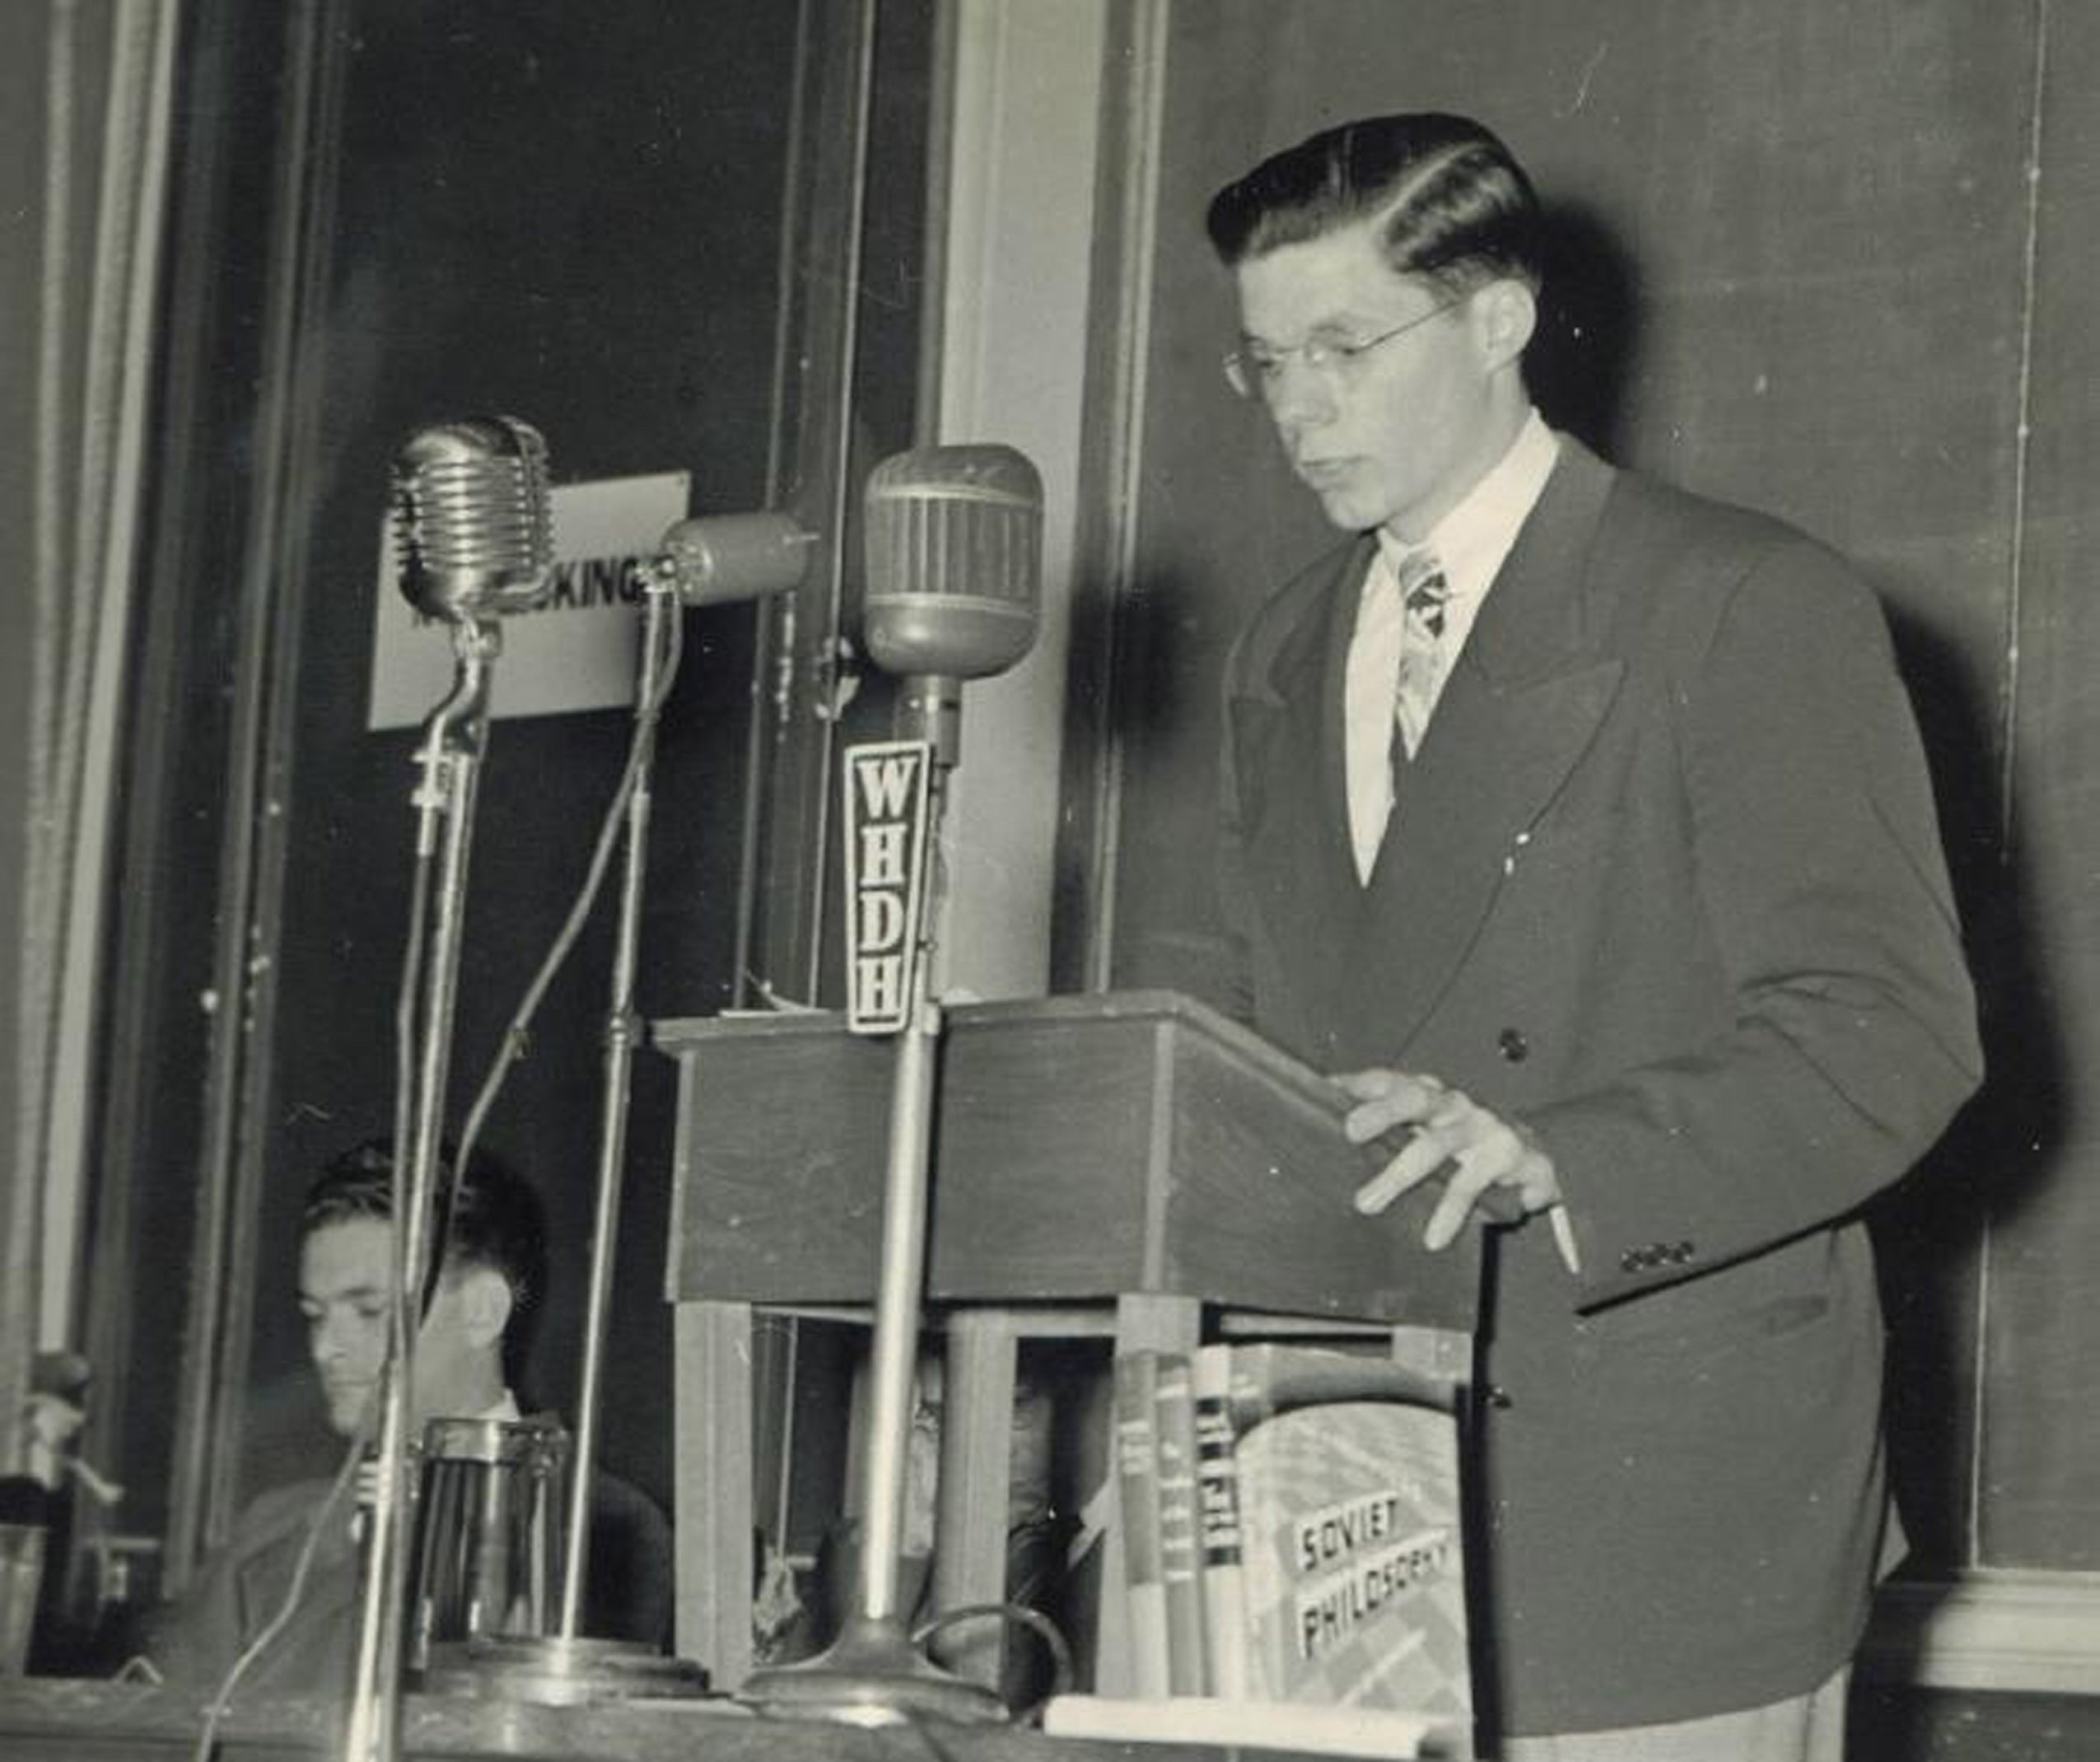 A young man at a podium with micr